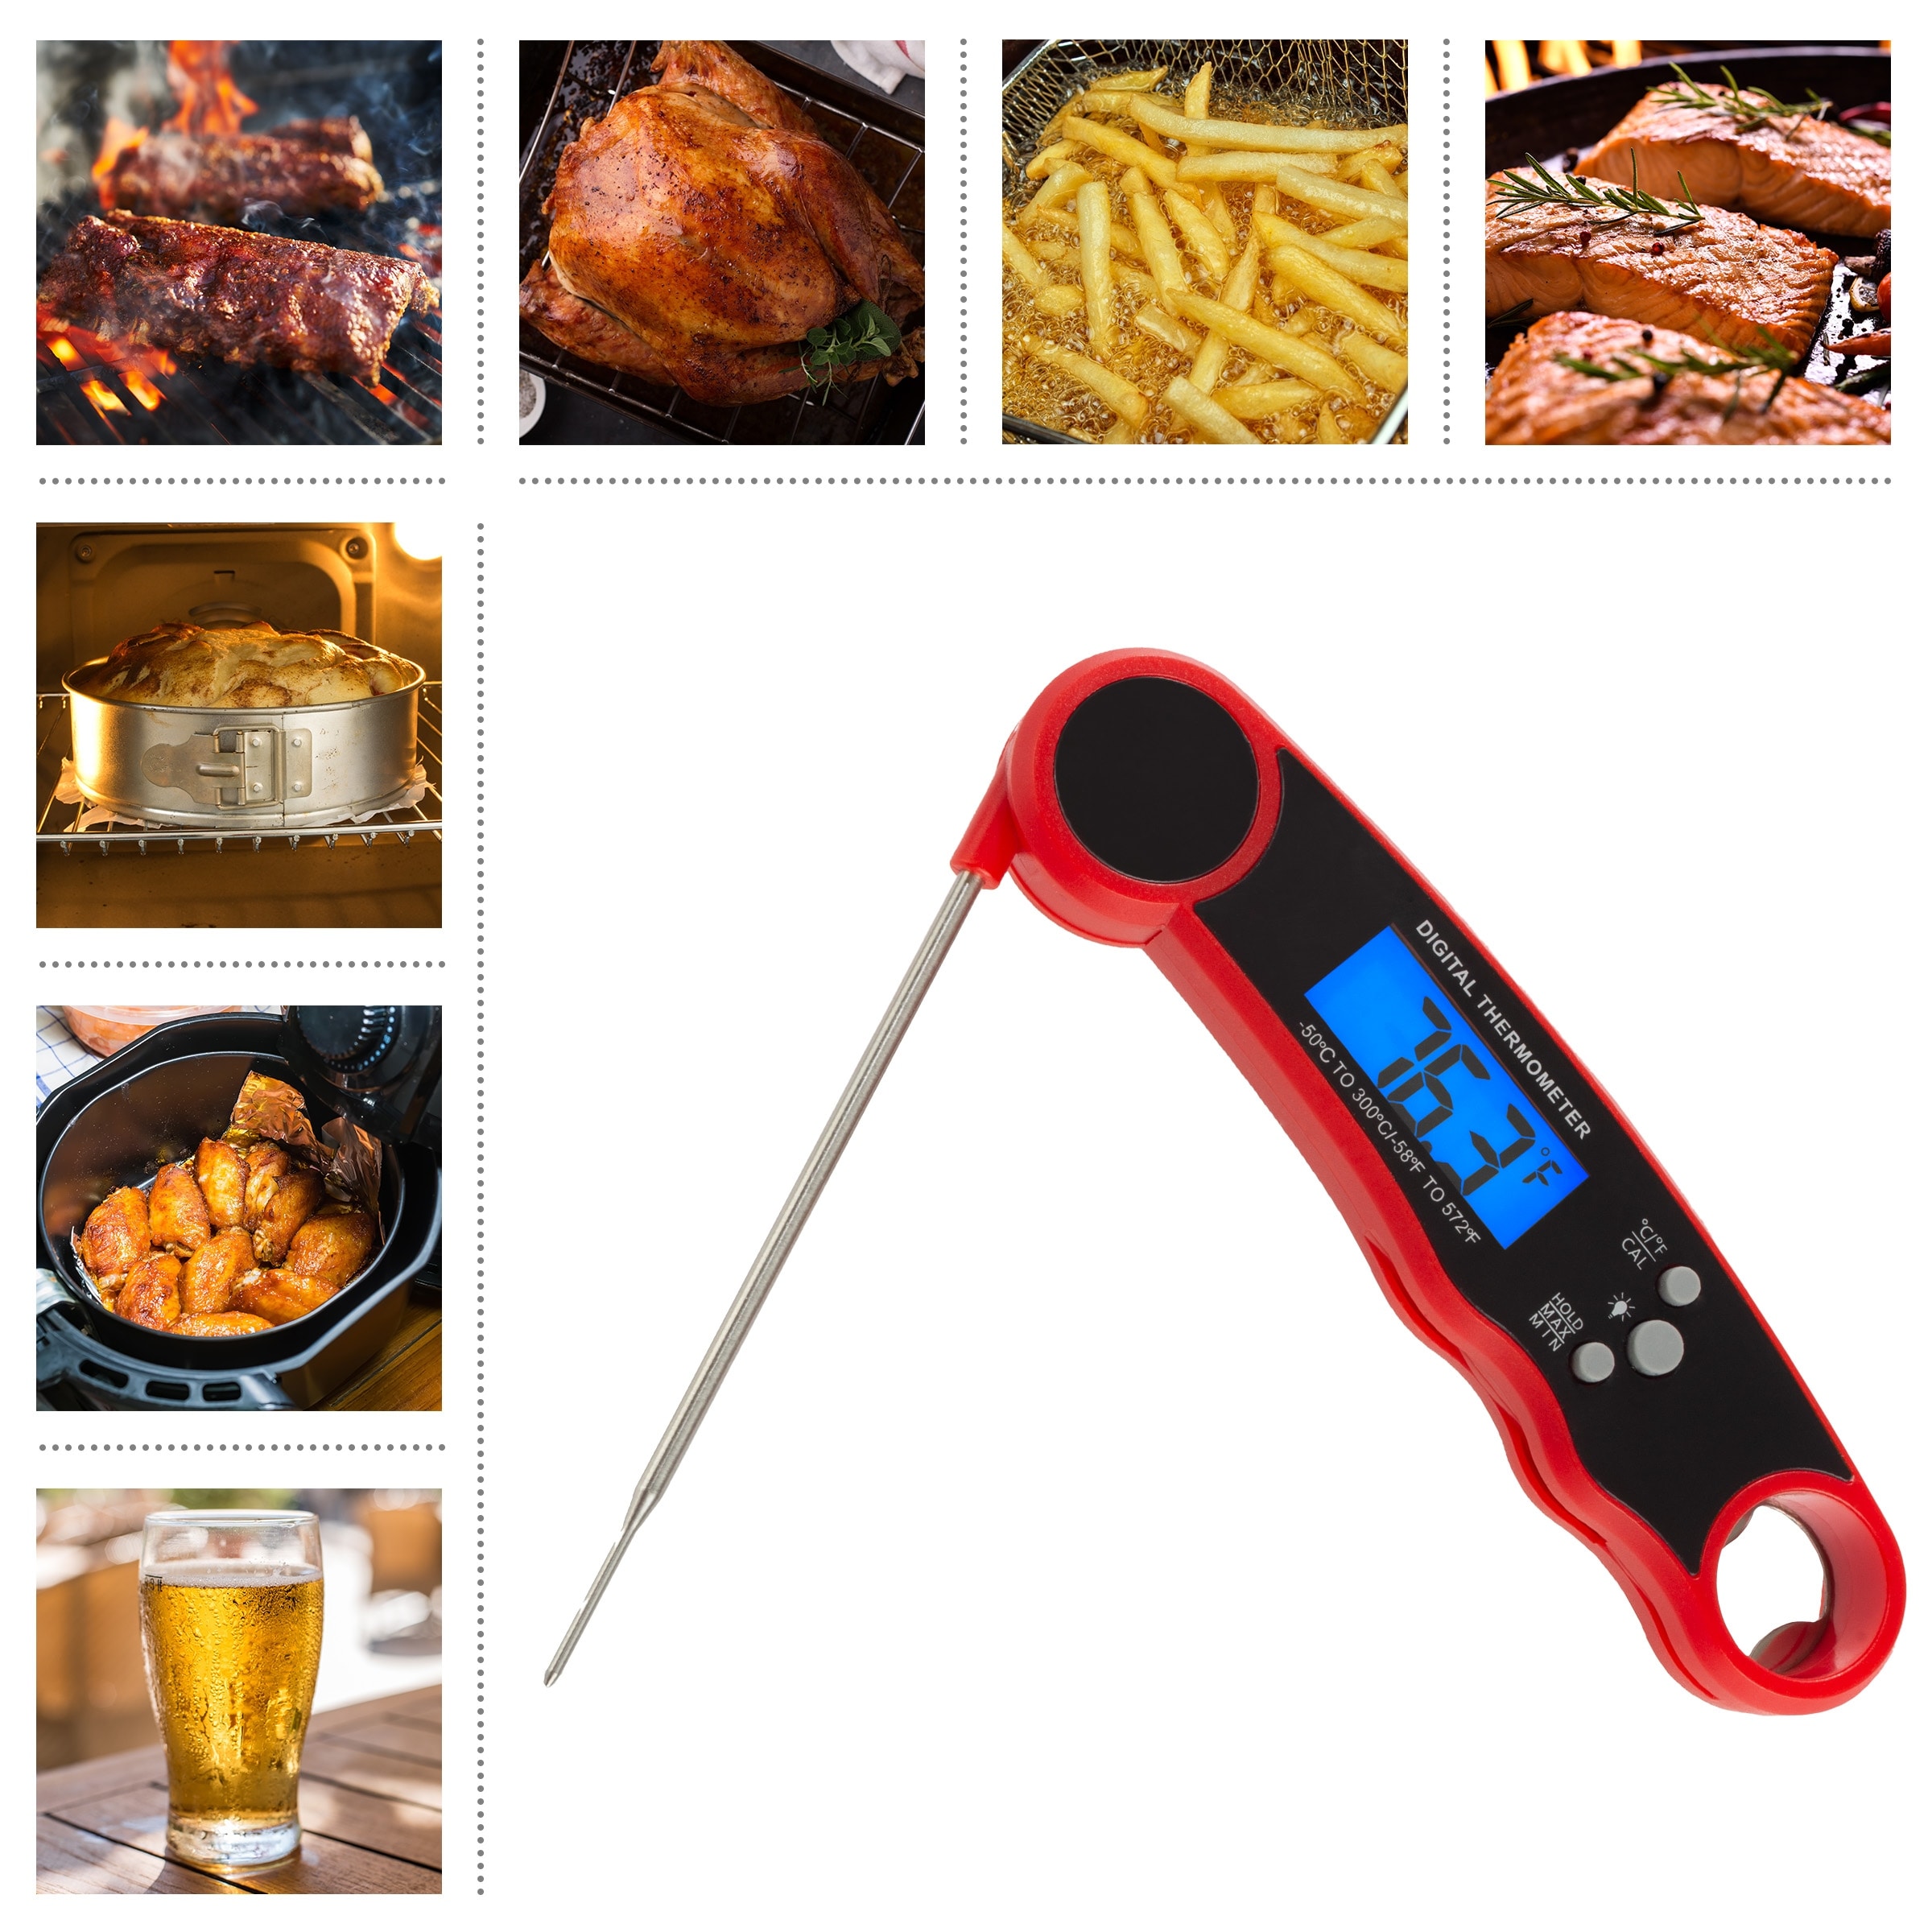 https://ak1.ostkcdn.com/images/products/is/images/direct/8b5914ca1d678ccab7c1d813e31808456b55f48c/Instant-Read-Food-Thermometer---Water-Resistant-Digital-Thermometer-with-Magnetic-Back-by-Home-Complete.jpg